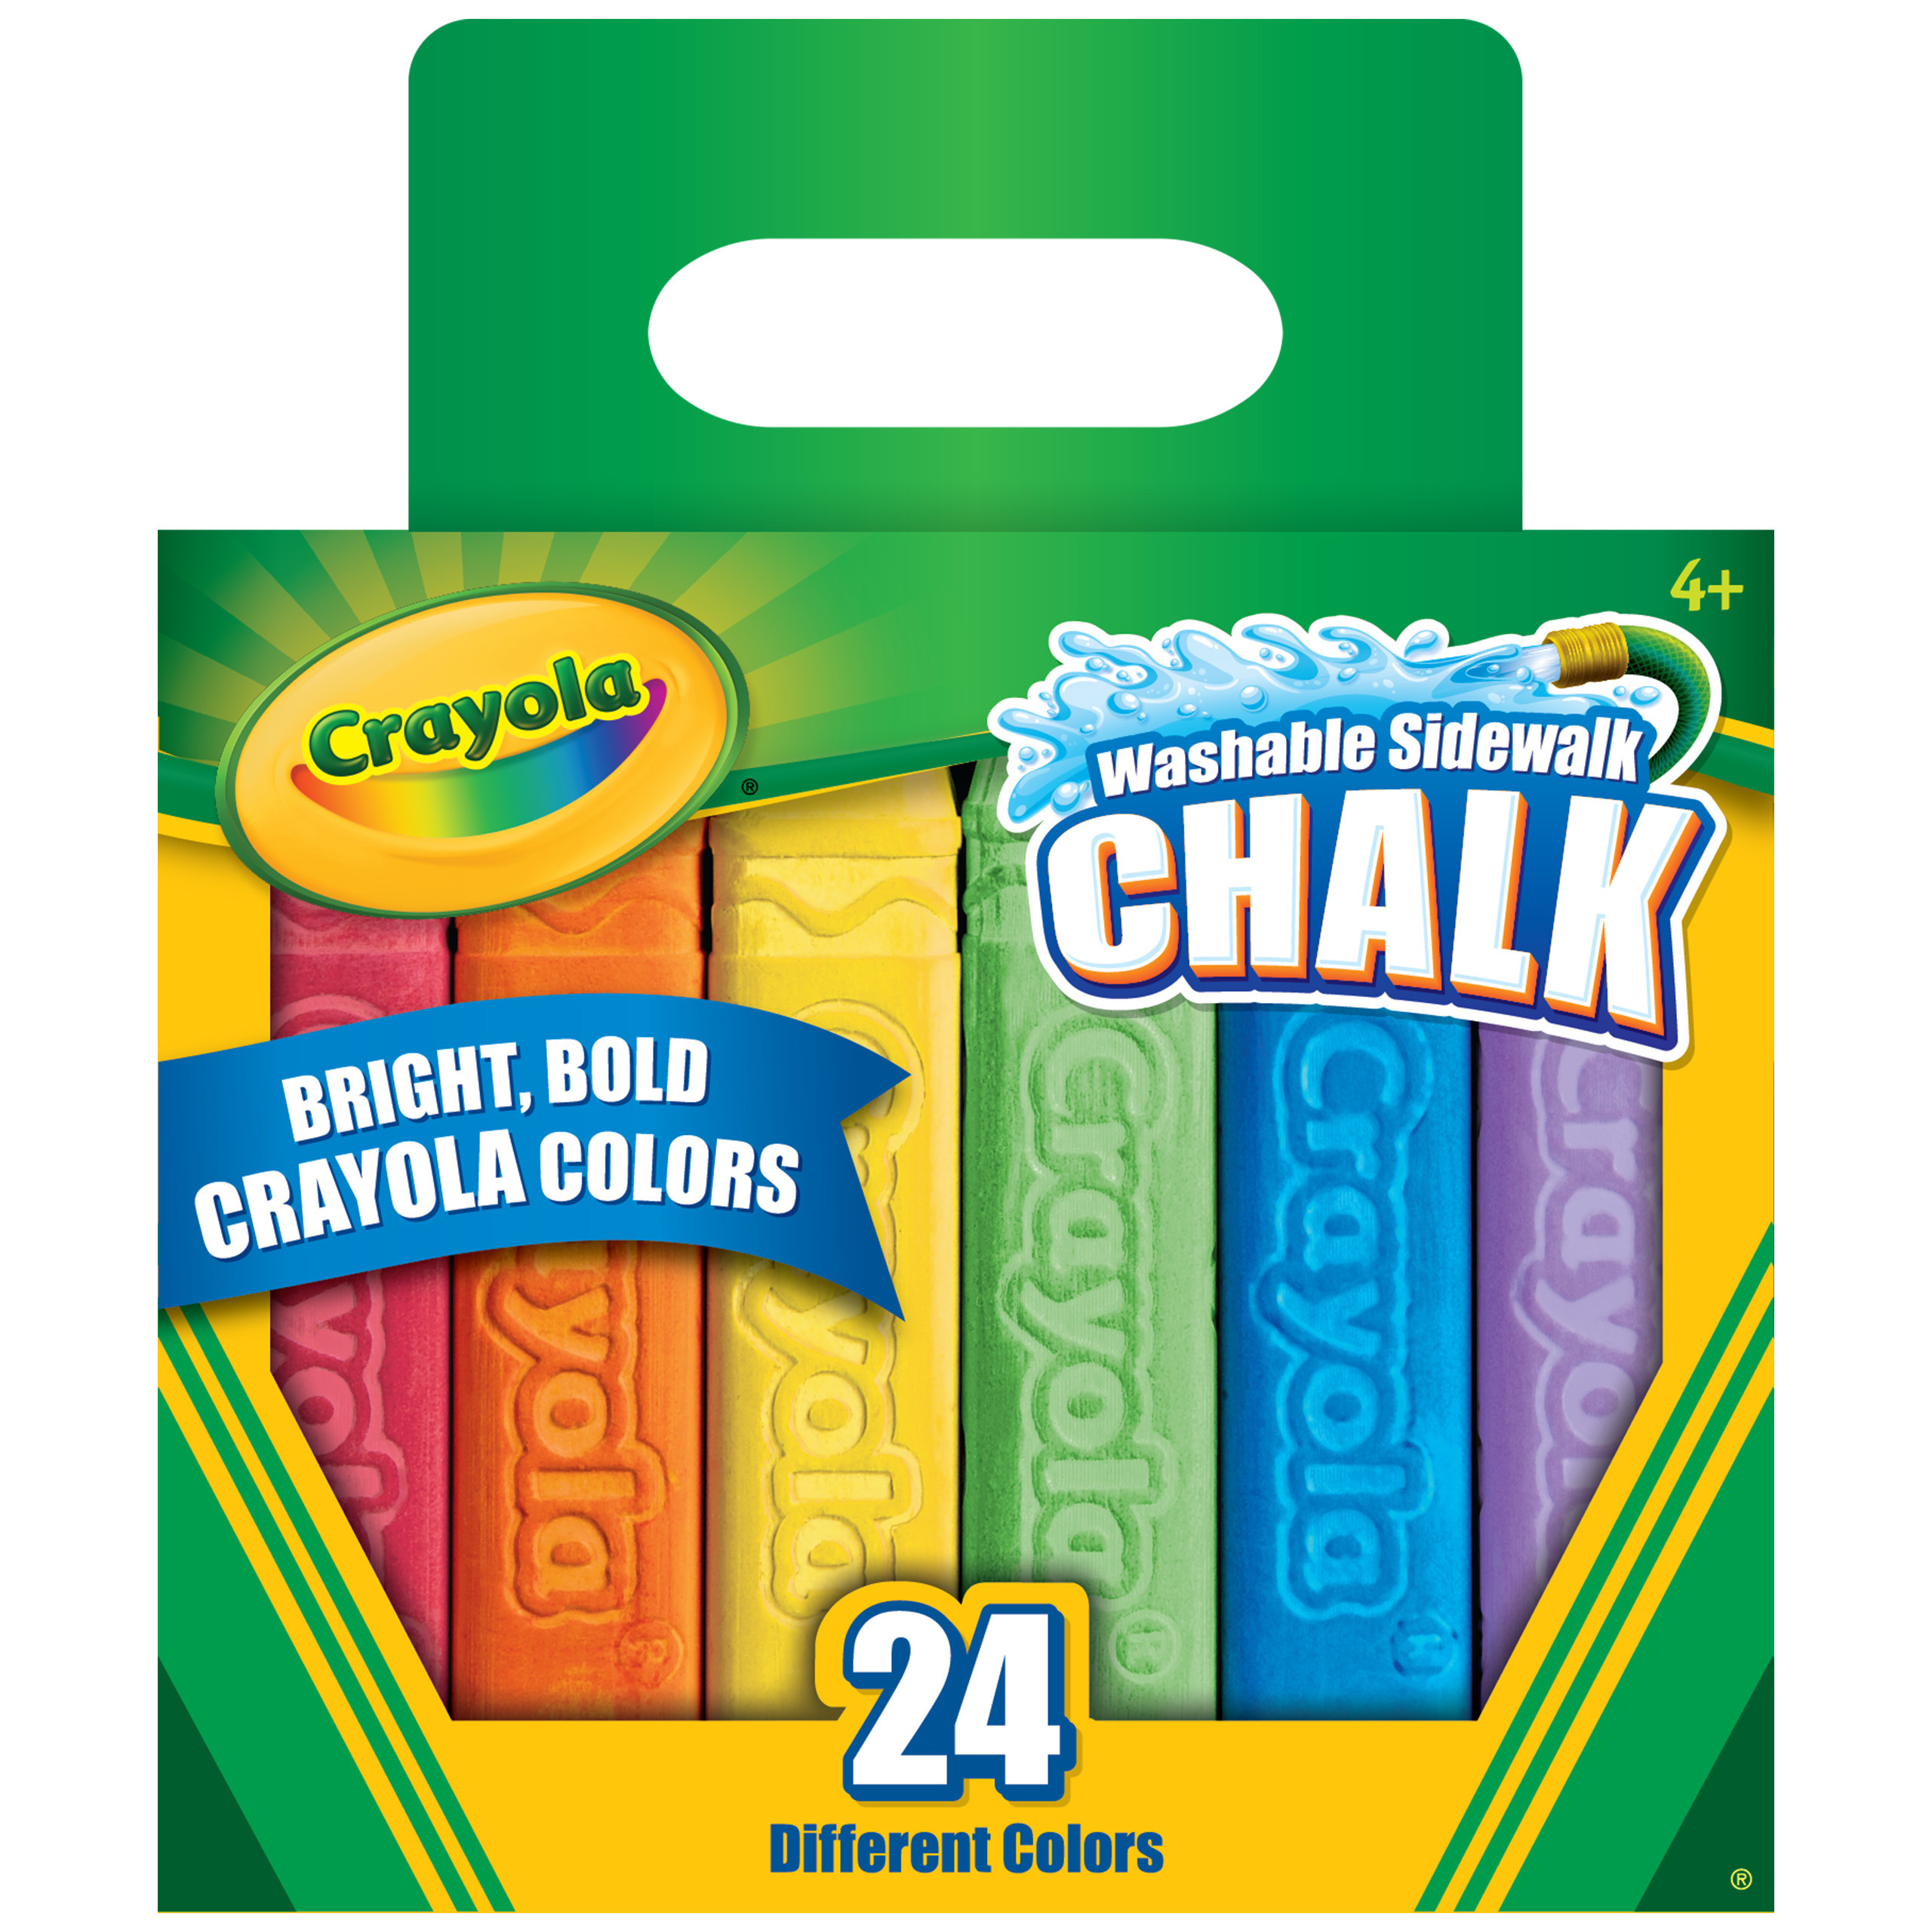 Crayola Washable Sidewalk Chalk in Assorted Colors, 24 Count - image 1 of 10